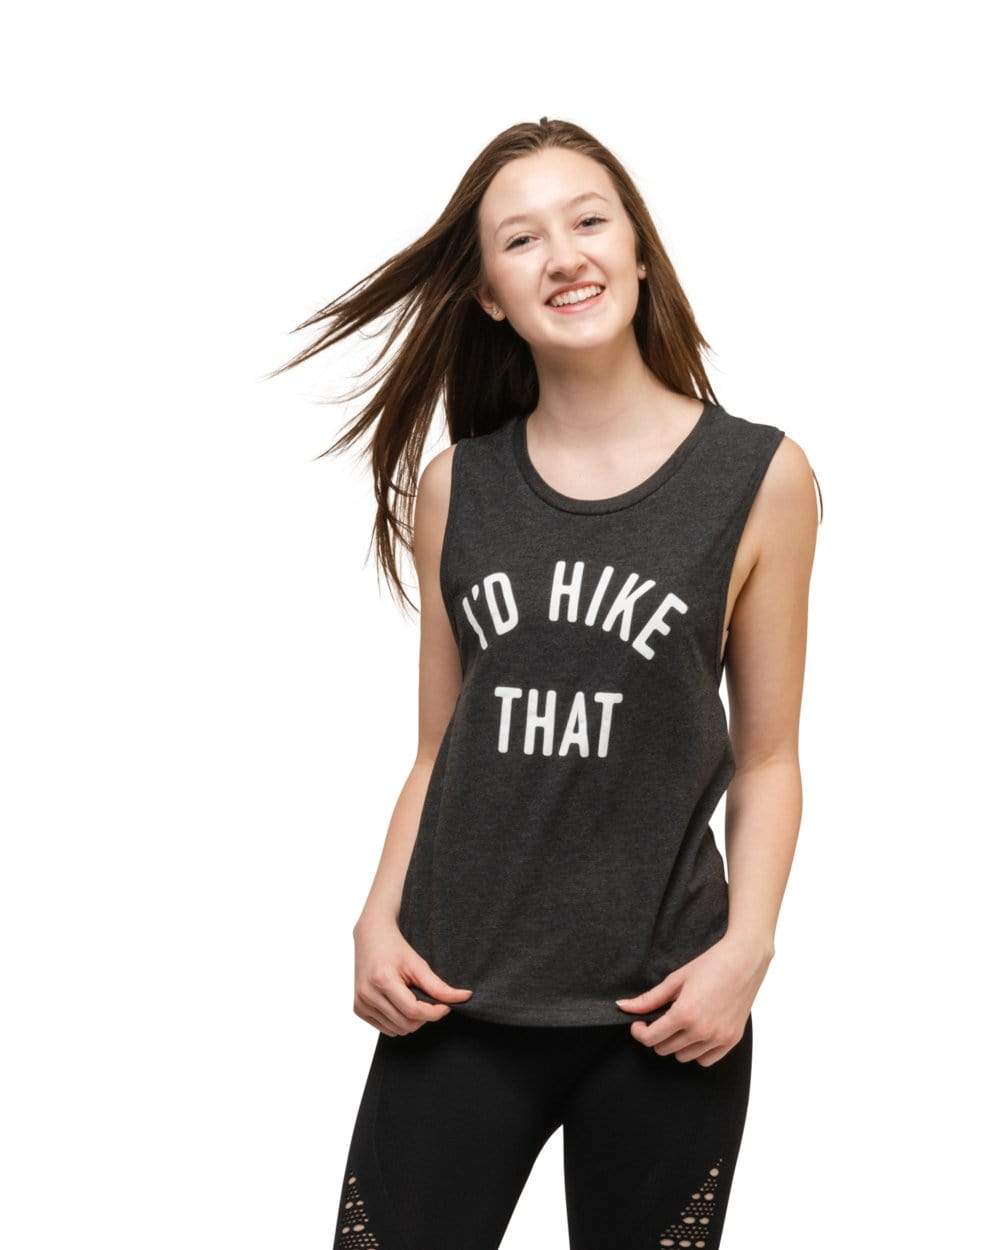 Keep Nature Wild Tank I'd Hike That Women's Muscle Tank | Charcoal Grey